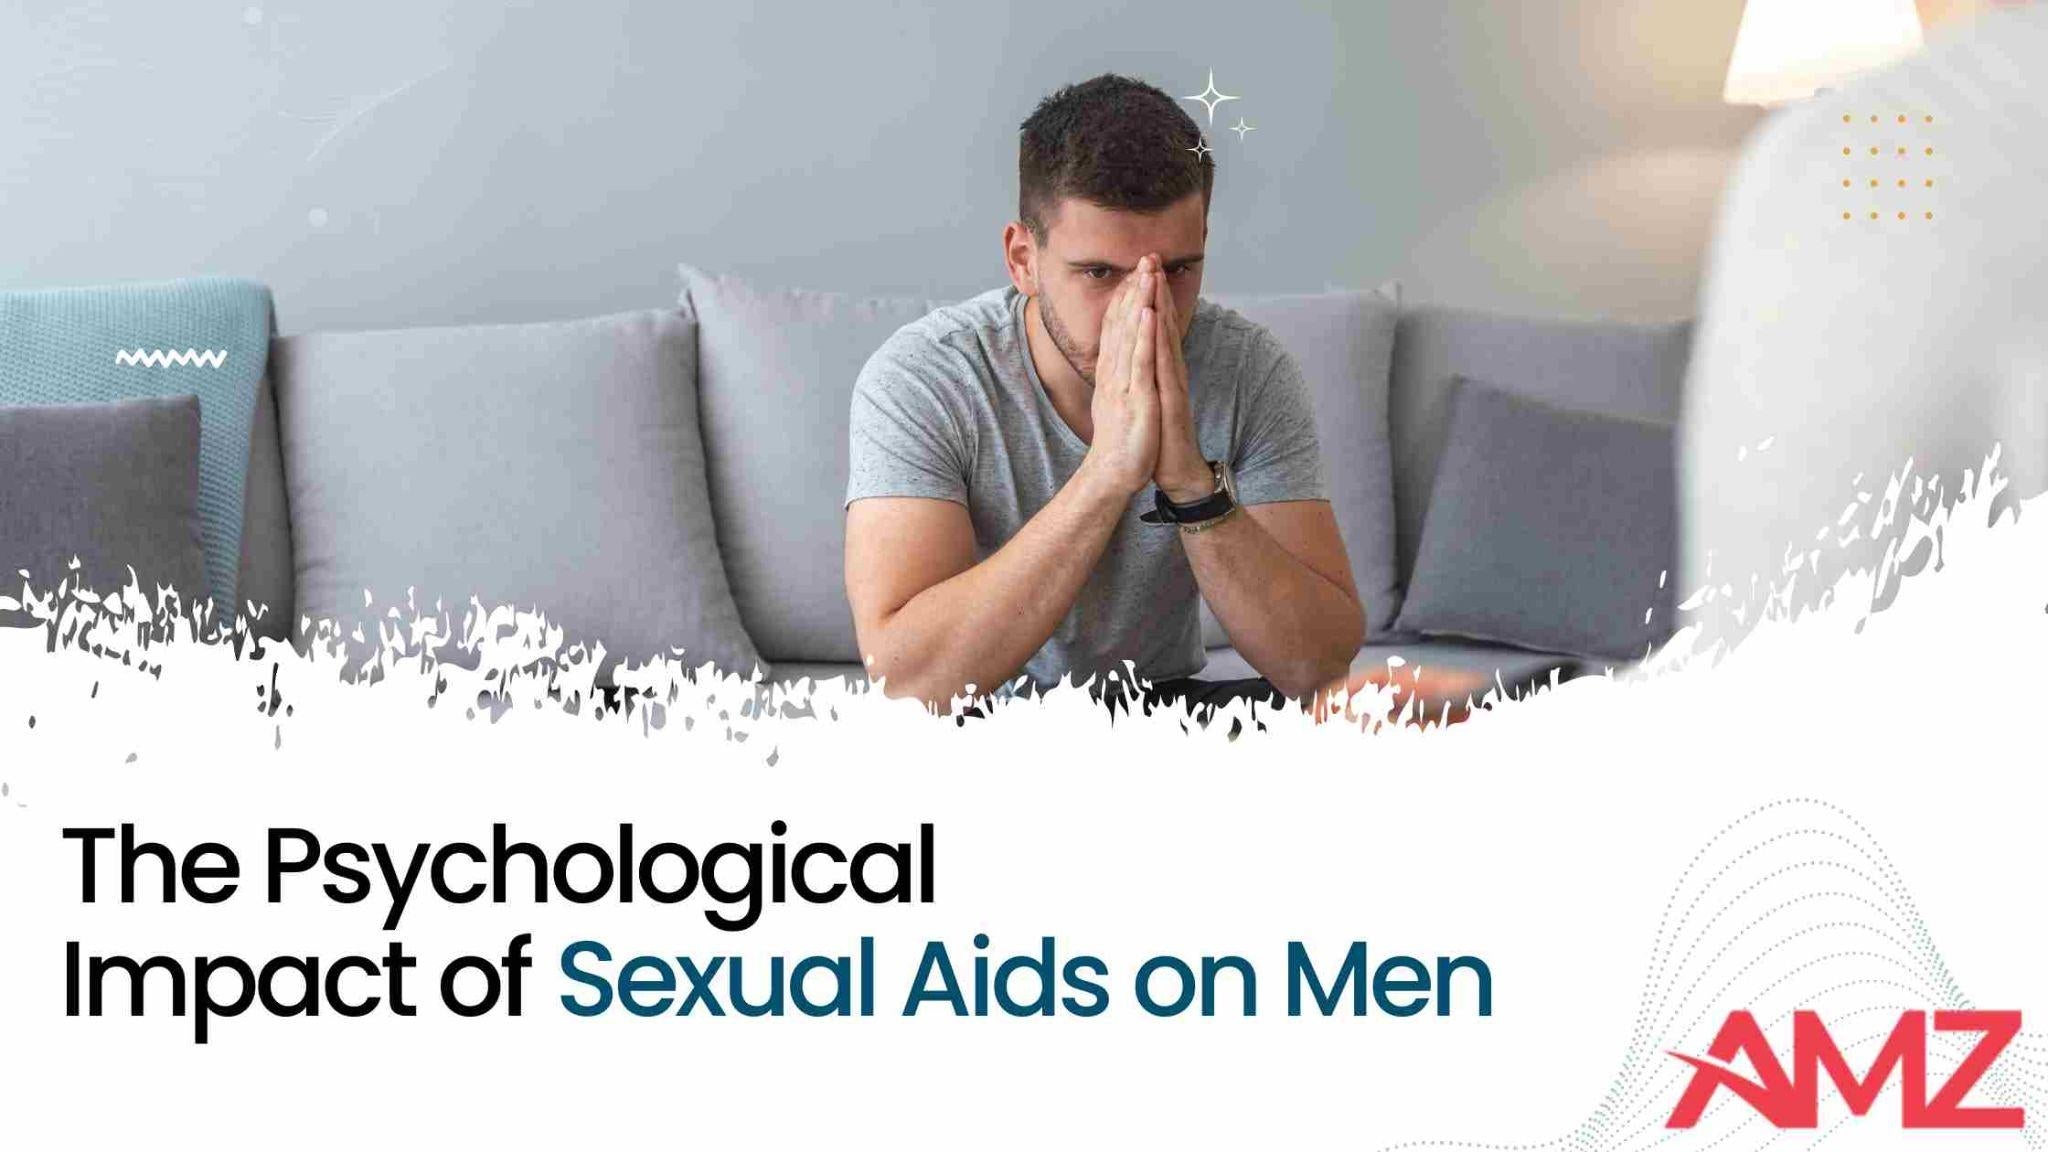 The Psychological Impact of Sexual Aids on Men